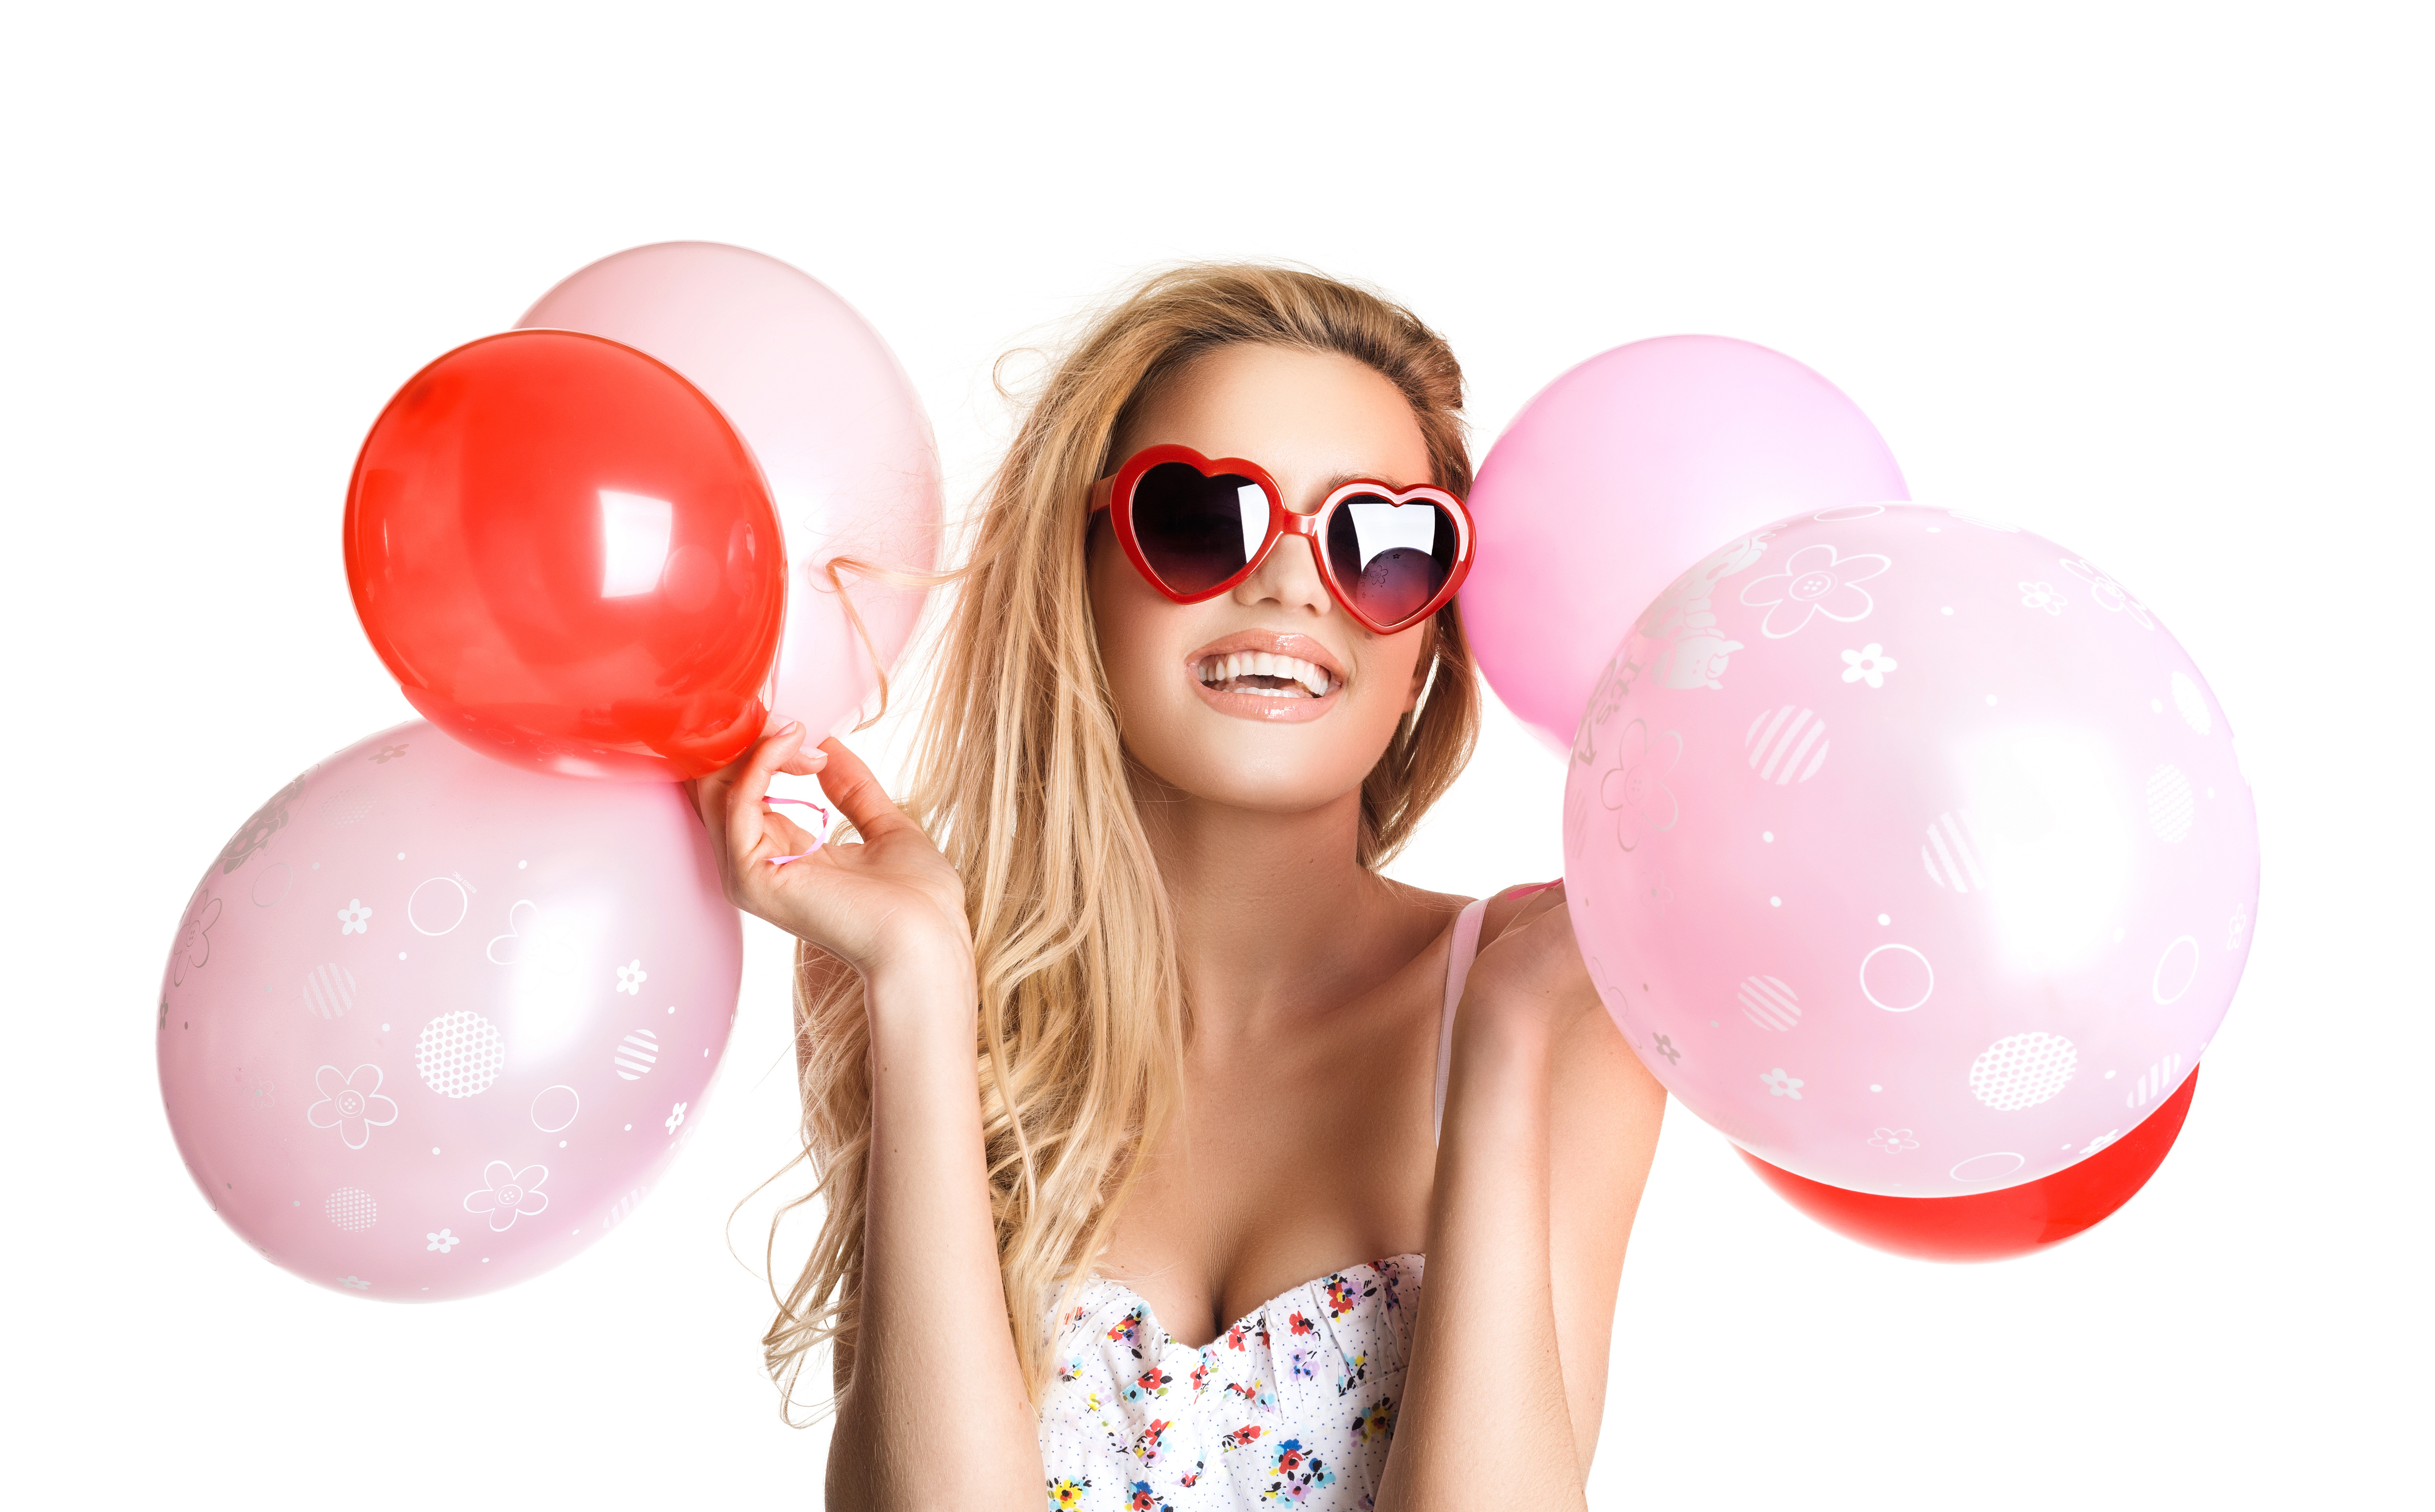 People 5000x3105 model depth of field women with glasses balloon party balloons women simple background